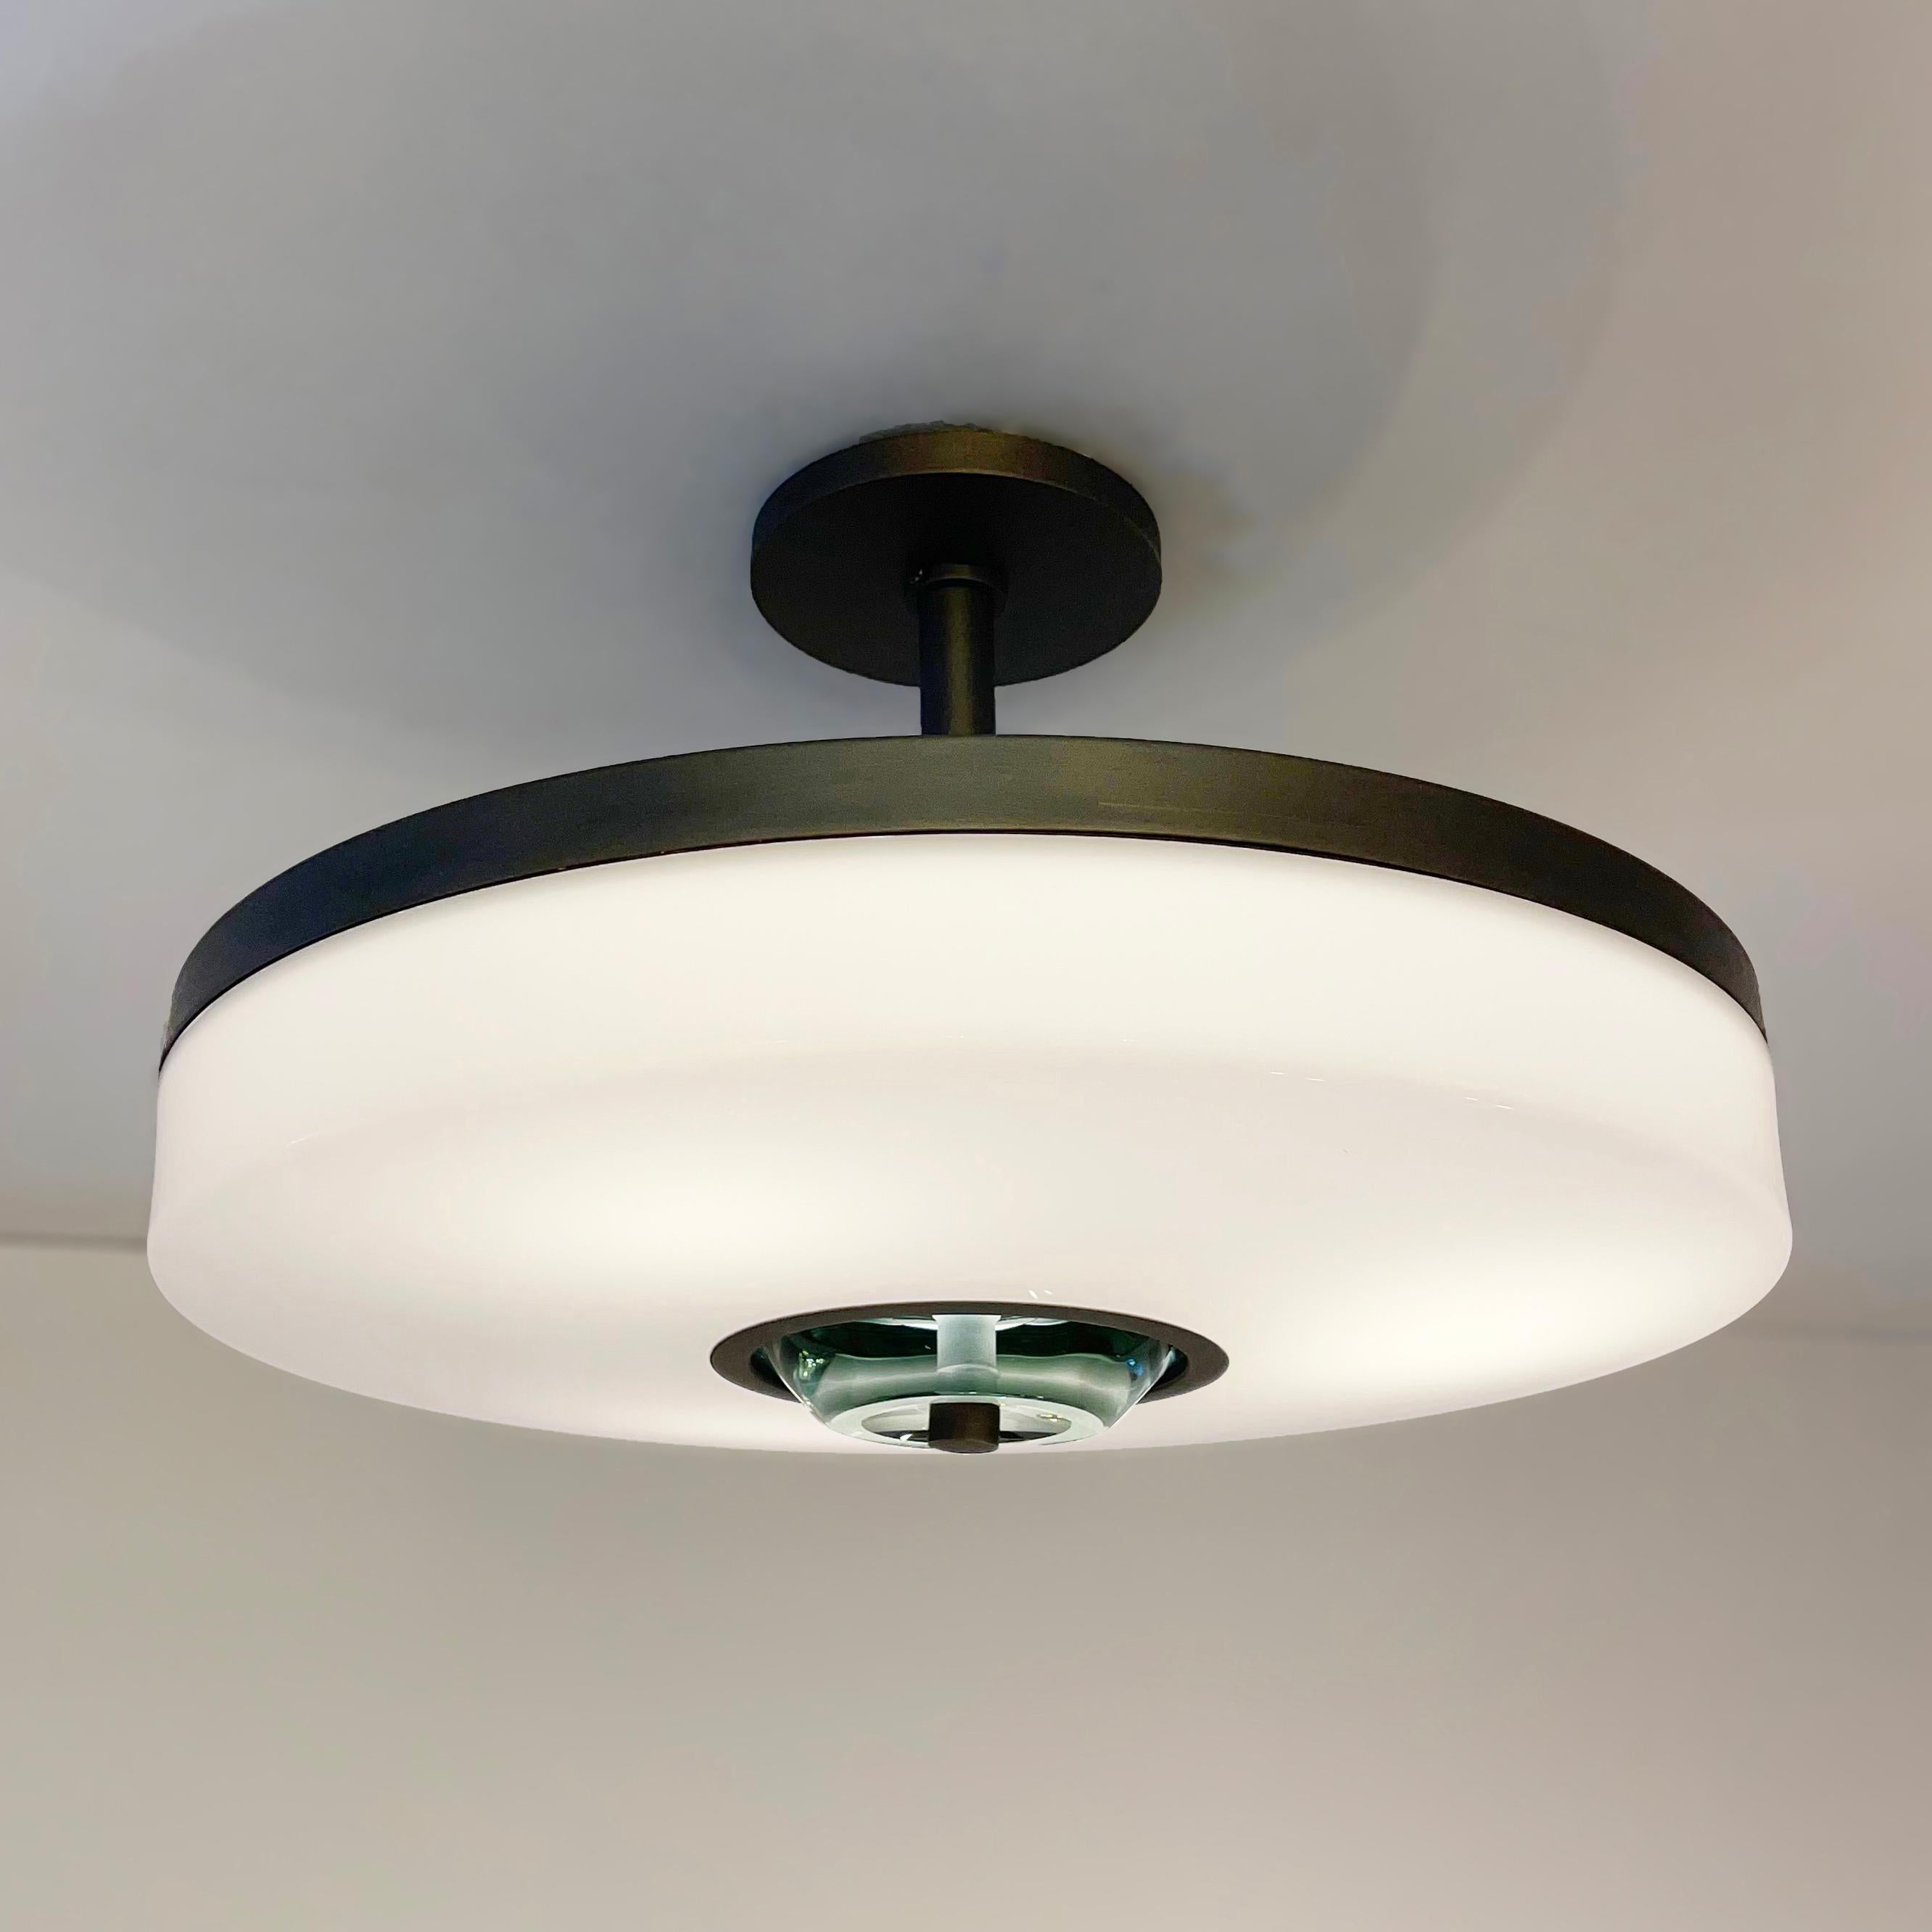 The Iris Piccolo ceiling light is designed around an acrylic shade with a hand carved glass center. This versatile fixture can be installed as a pendant on a stem or as a true flush mount. The first images show the fixture in our Brunito Nero (Black